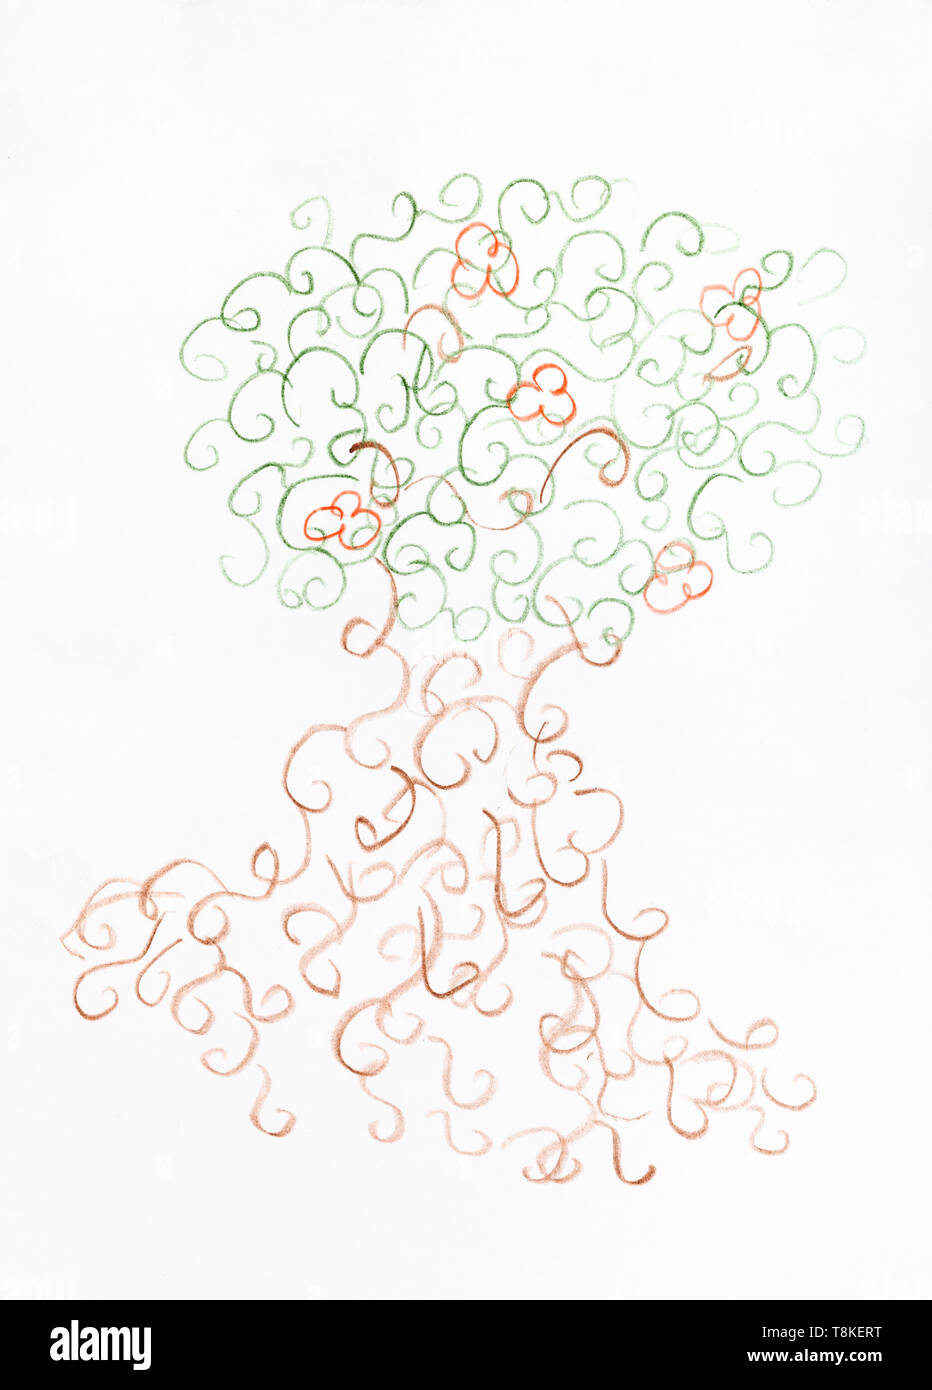 fancy tree from squiggles of hand-drawn by colour pencils on white paper Stock Photo